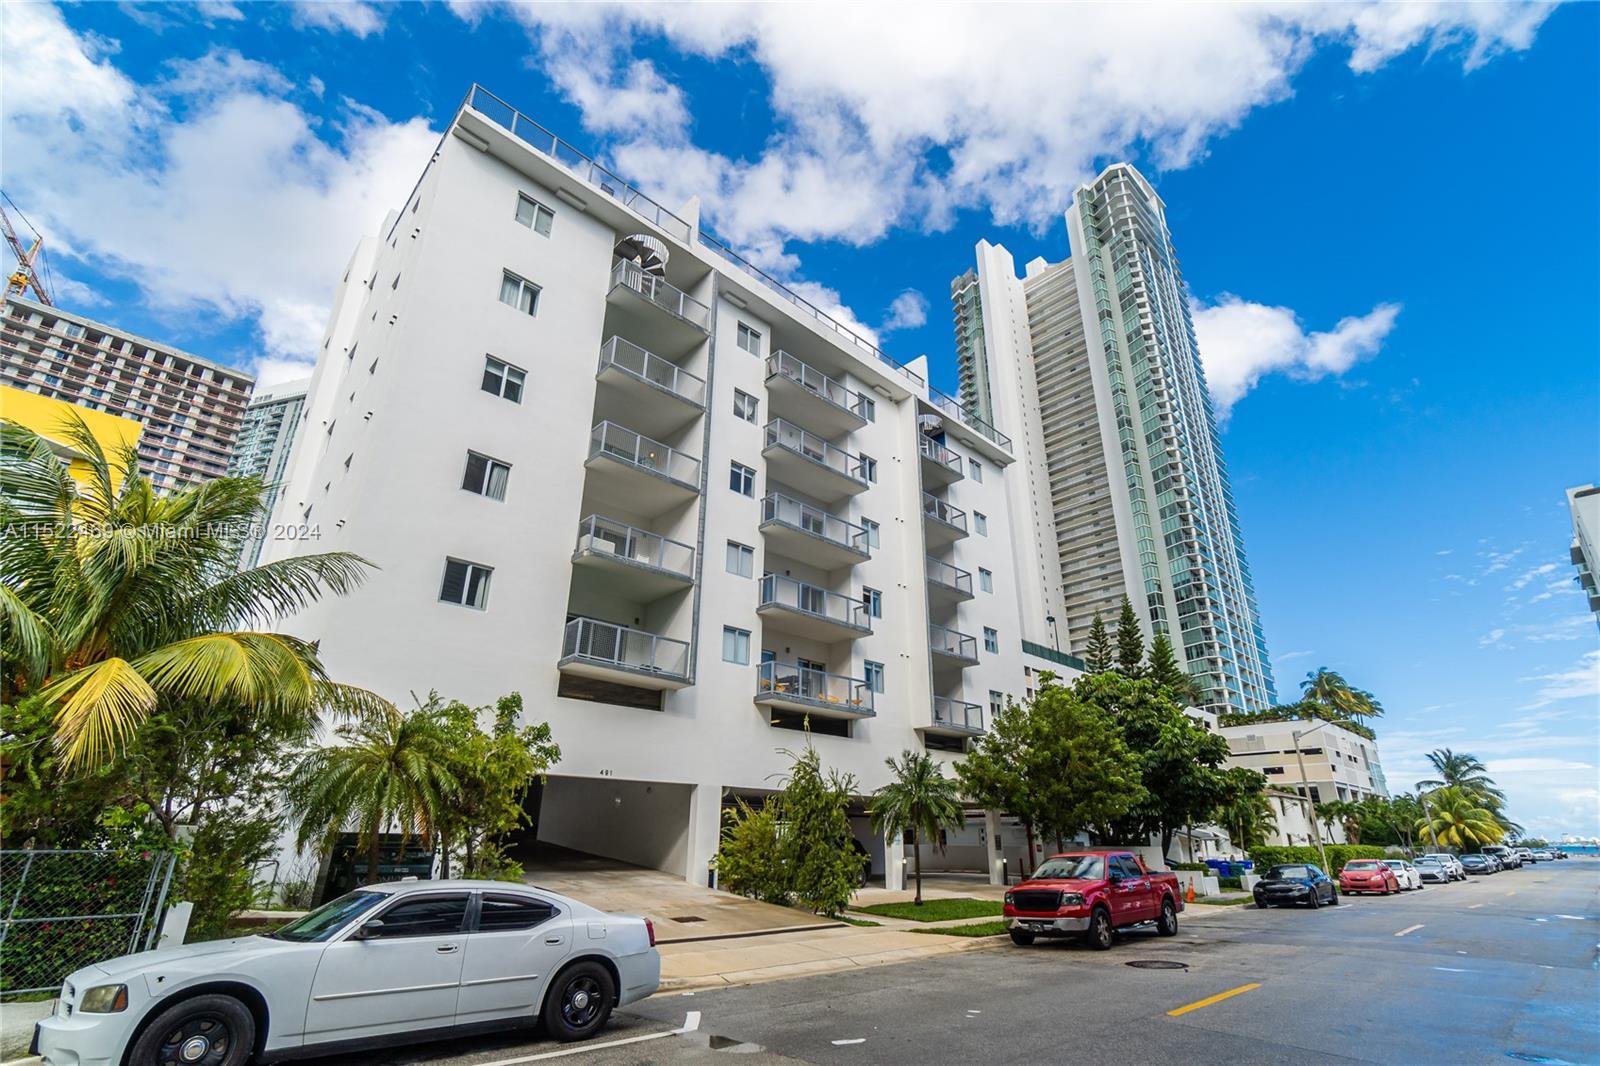 Great investment opportunity. Edgewater location. 2 bed 2 bath rental property in the heart of Miami